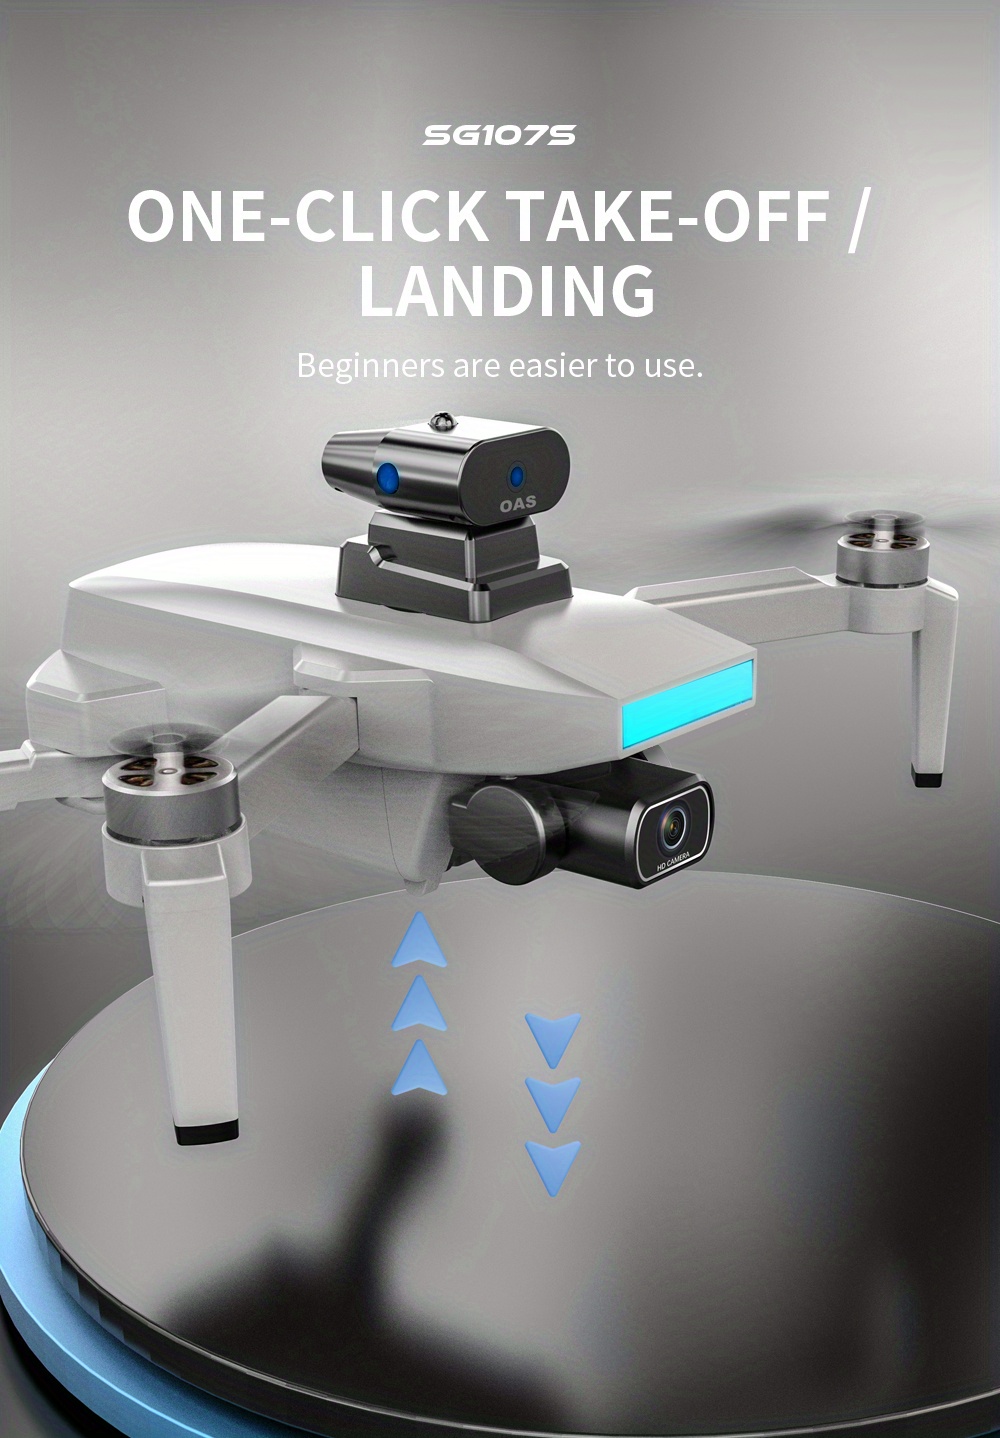 obstacle avoidance drone with dual high definition camera trajectory flight folding design optical flow position trajectory flight long lasting battery real time transmission carrying bag details 11